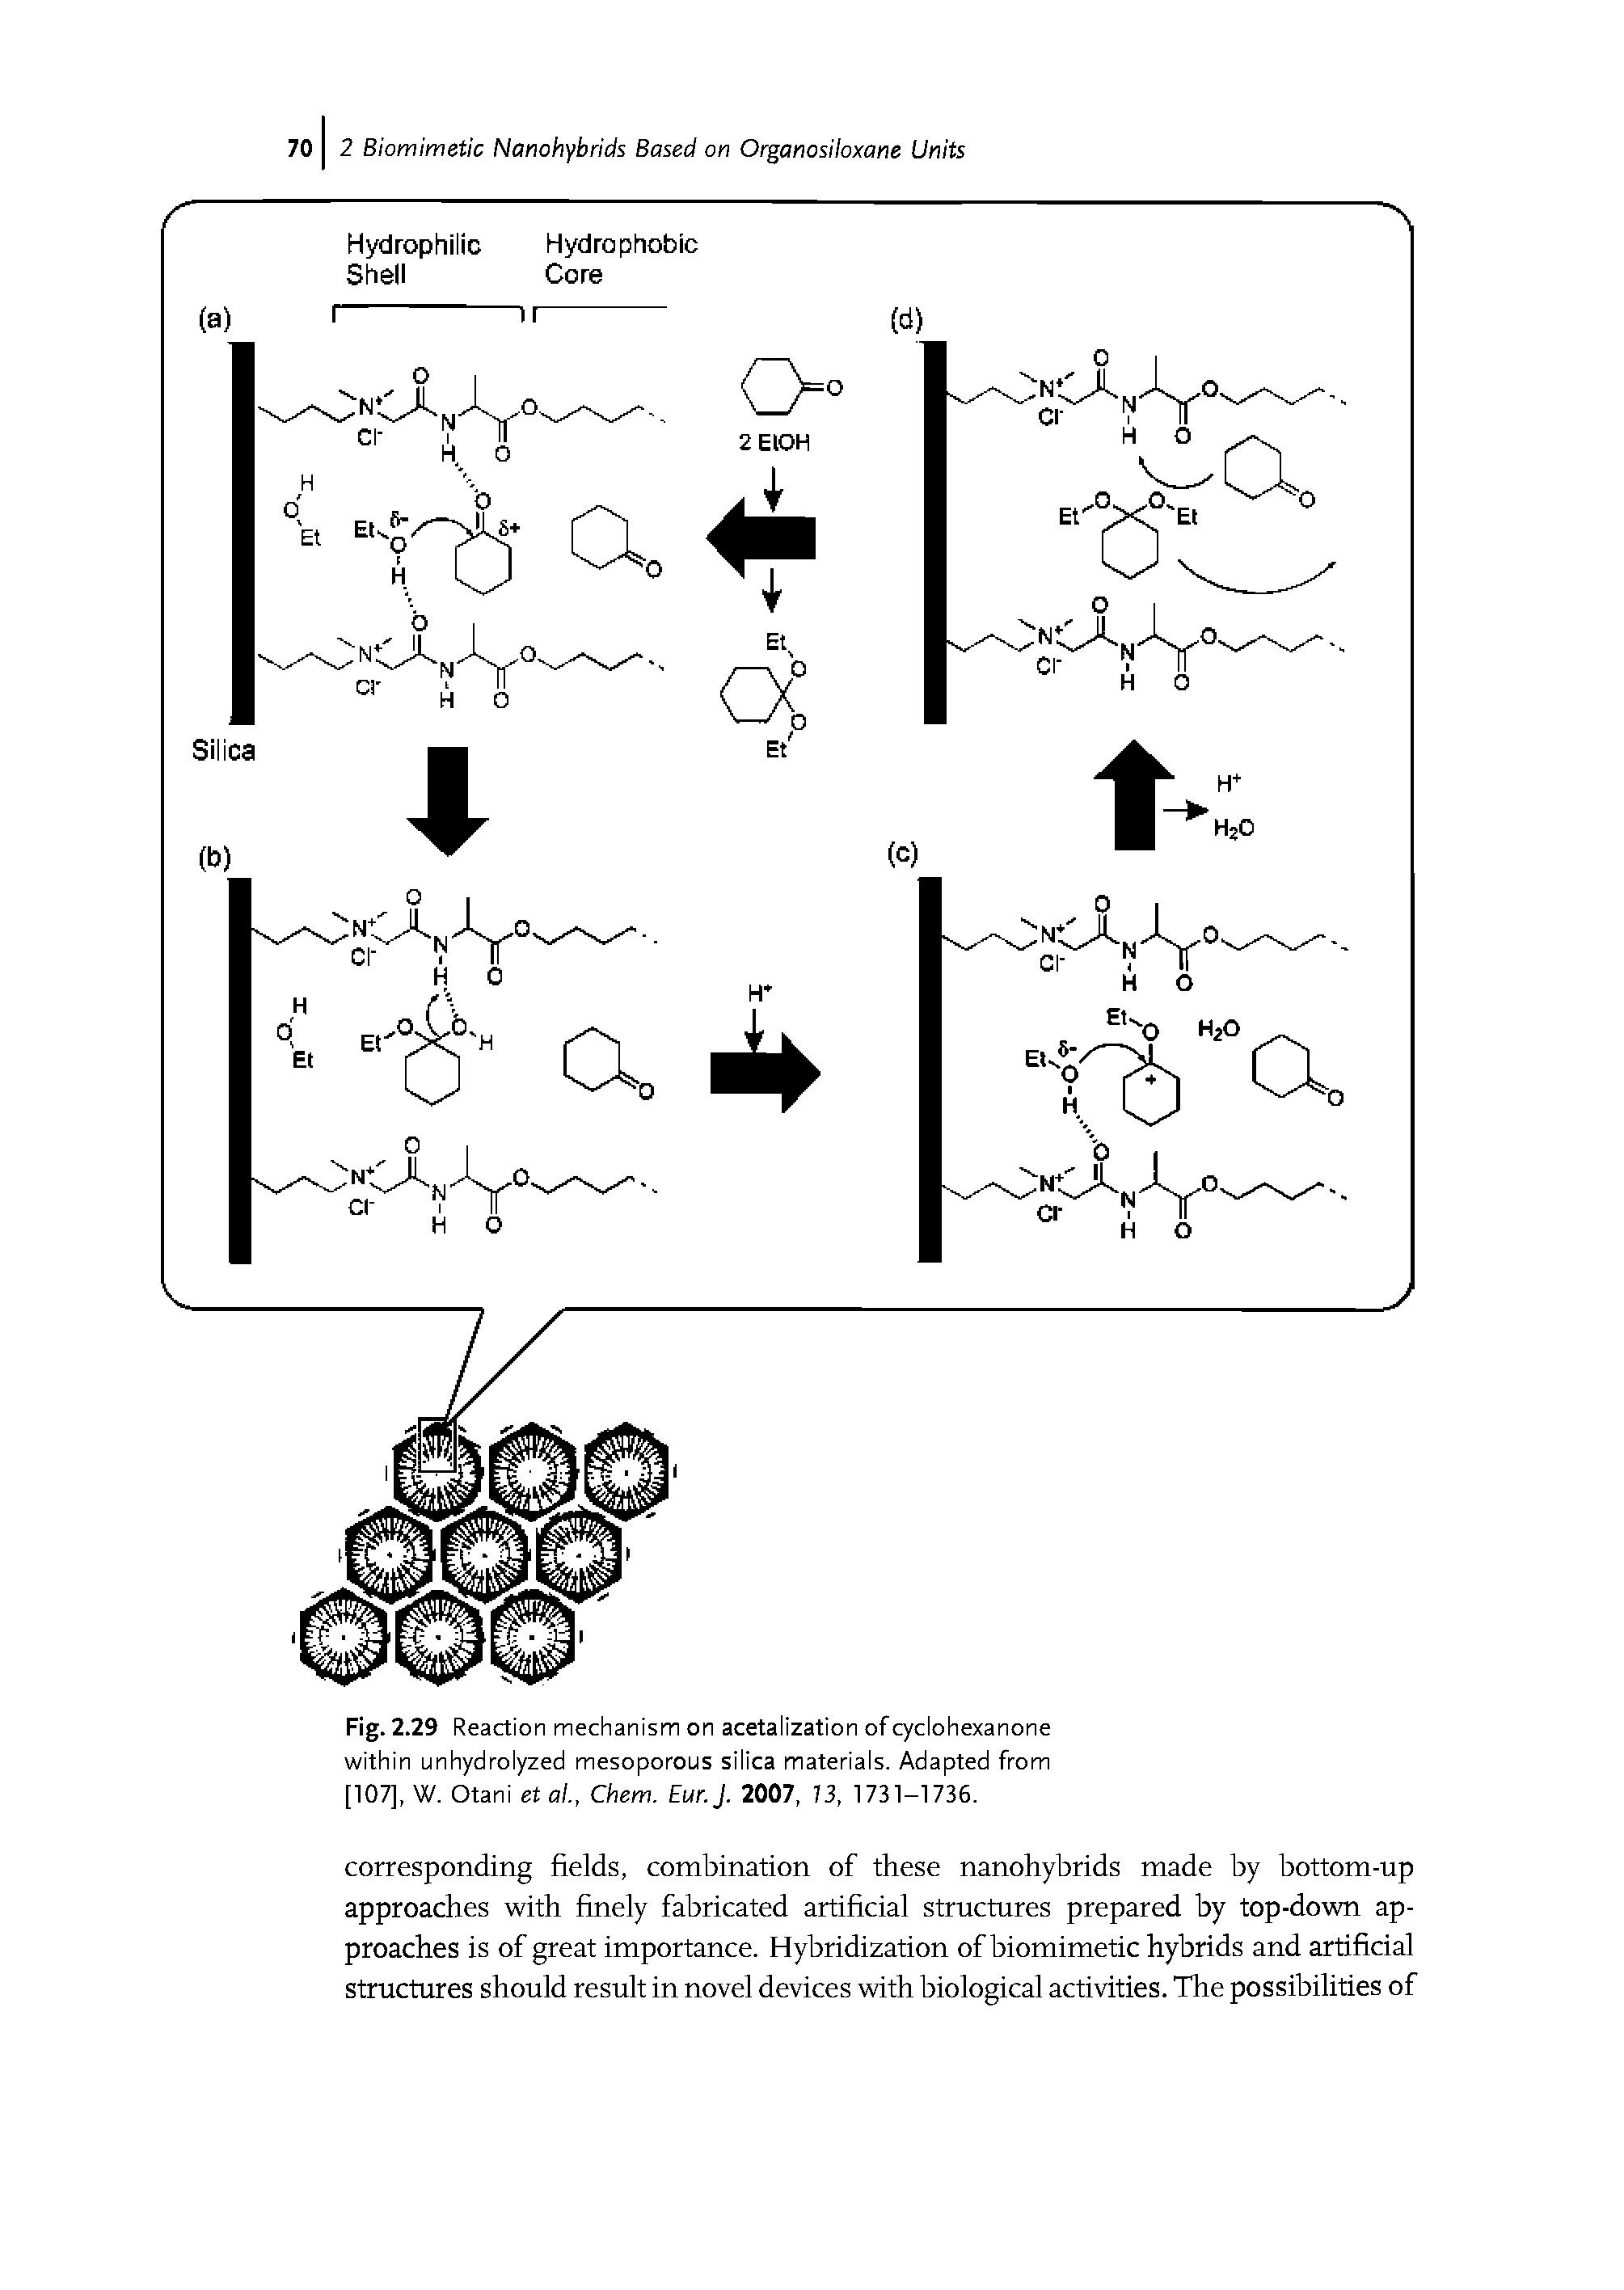 Fig. 2.29 Reaction mechanism on acetalization of cyclohexanone within unhydrolyzed mesoporous silica materials. Adapted from [107], W. Otani et al., Chem. Eur.J. 2007, 73, 1731-1736.